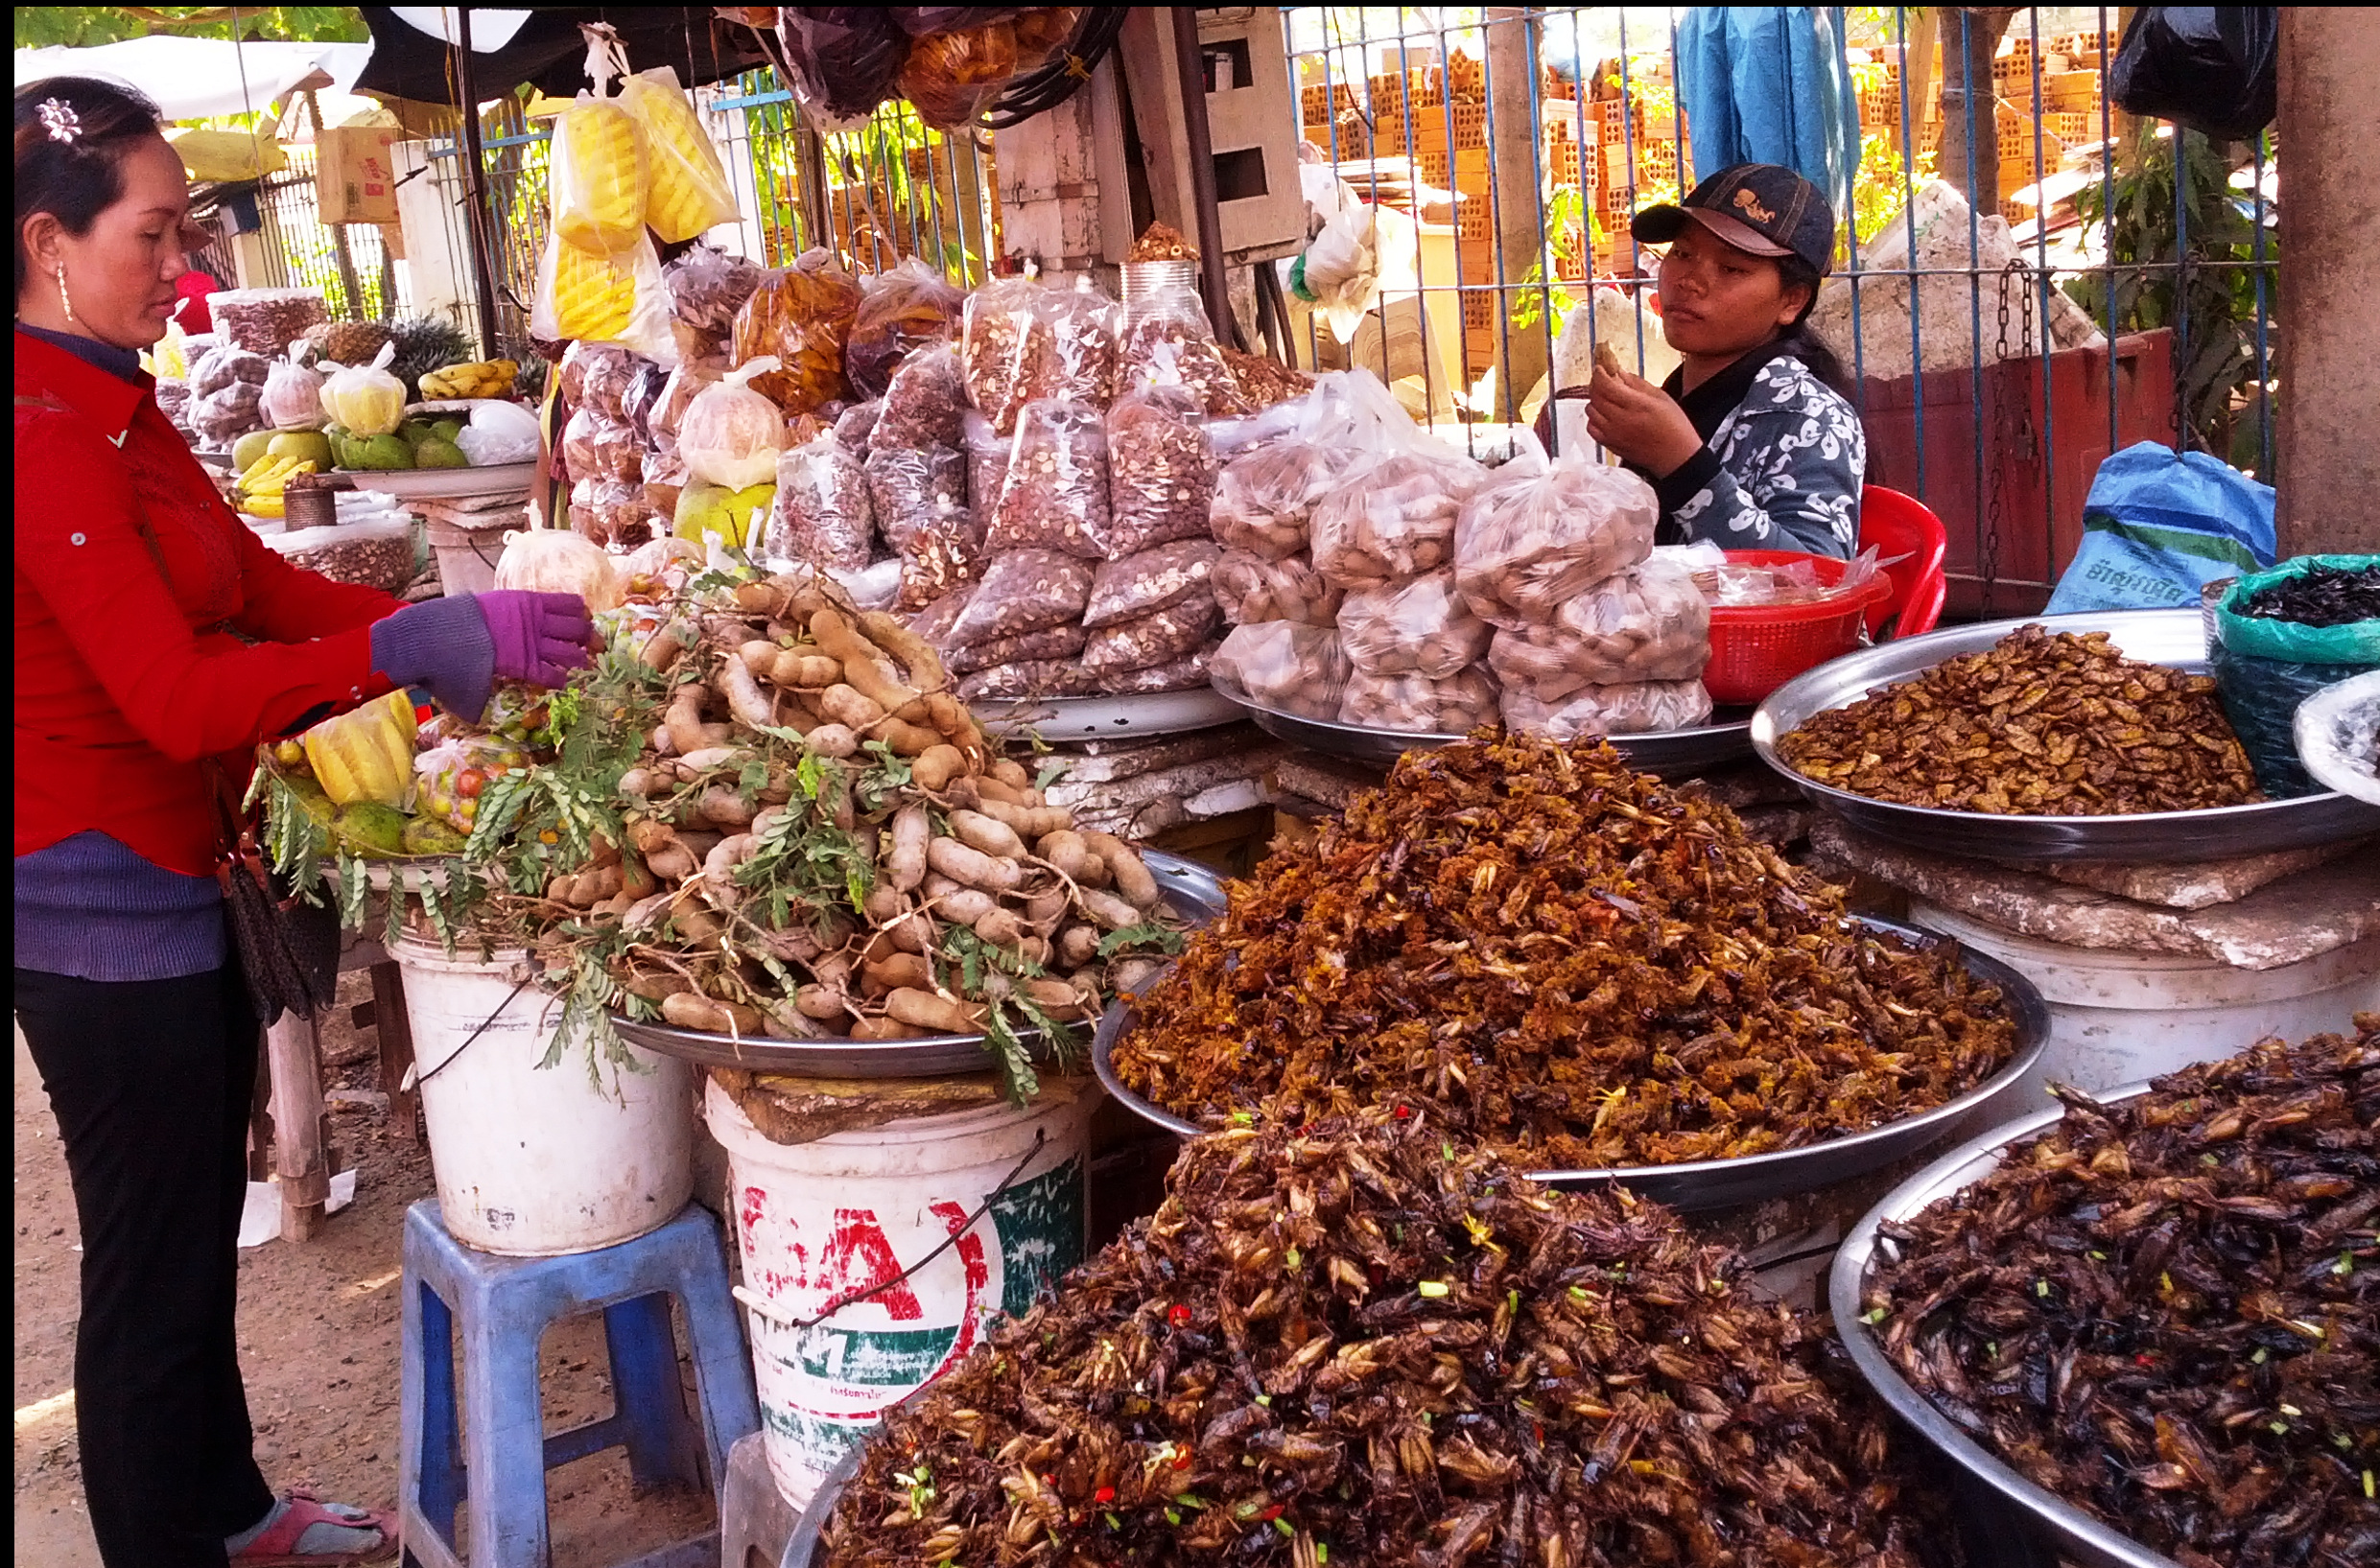 On the way further north into Vietnam local food markets are found everywhere. Often along with fruit and vegetables, one will find mole hills of crickets as a food sources because they are rich in protein.